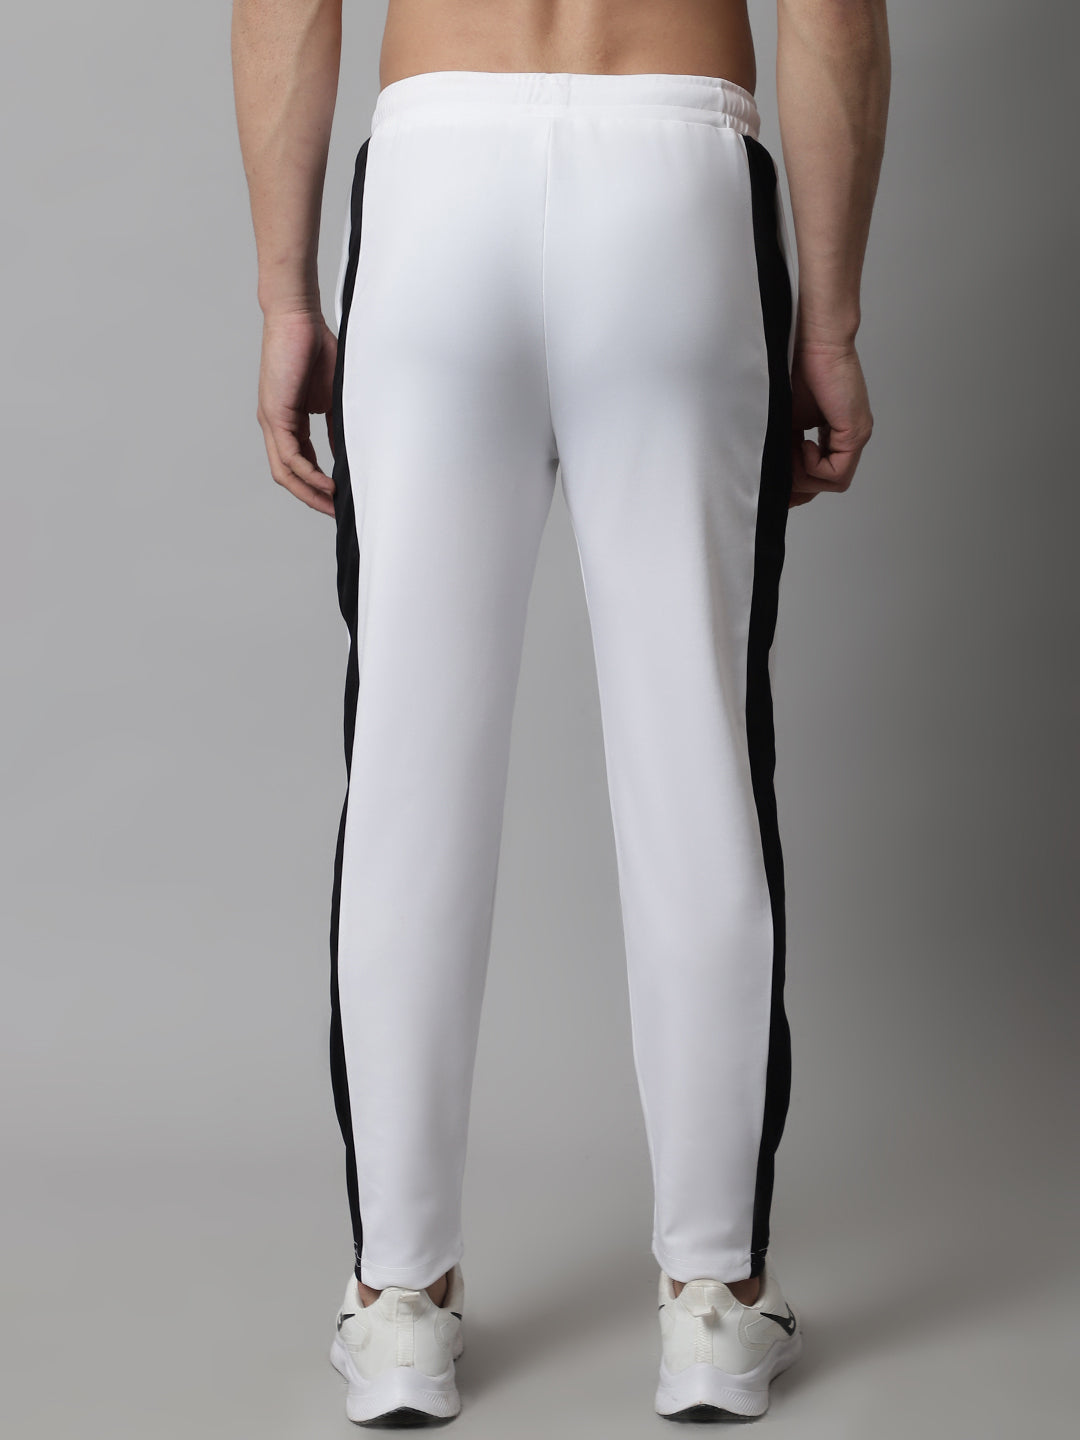 Men's White and Black Striped Streachable Lycra Trackpants